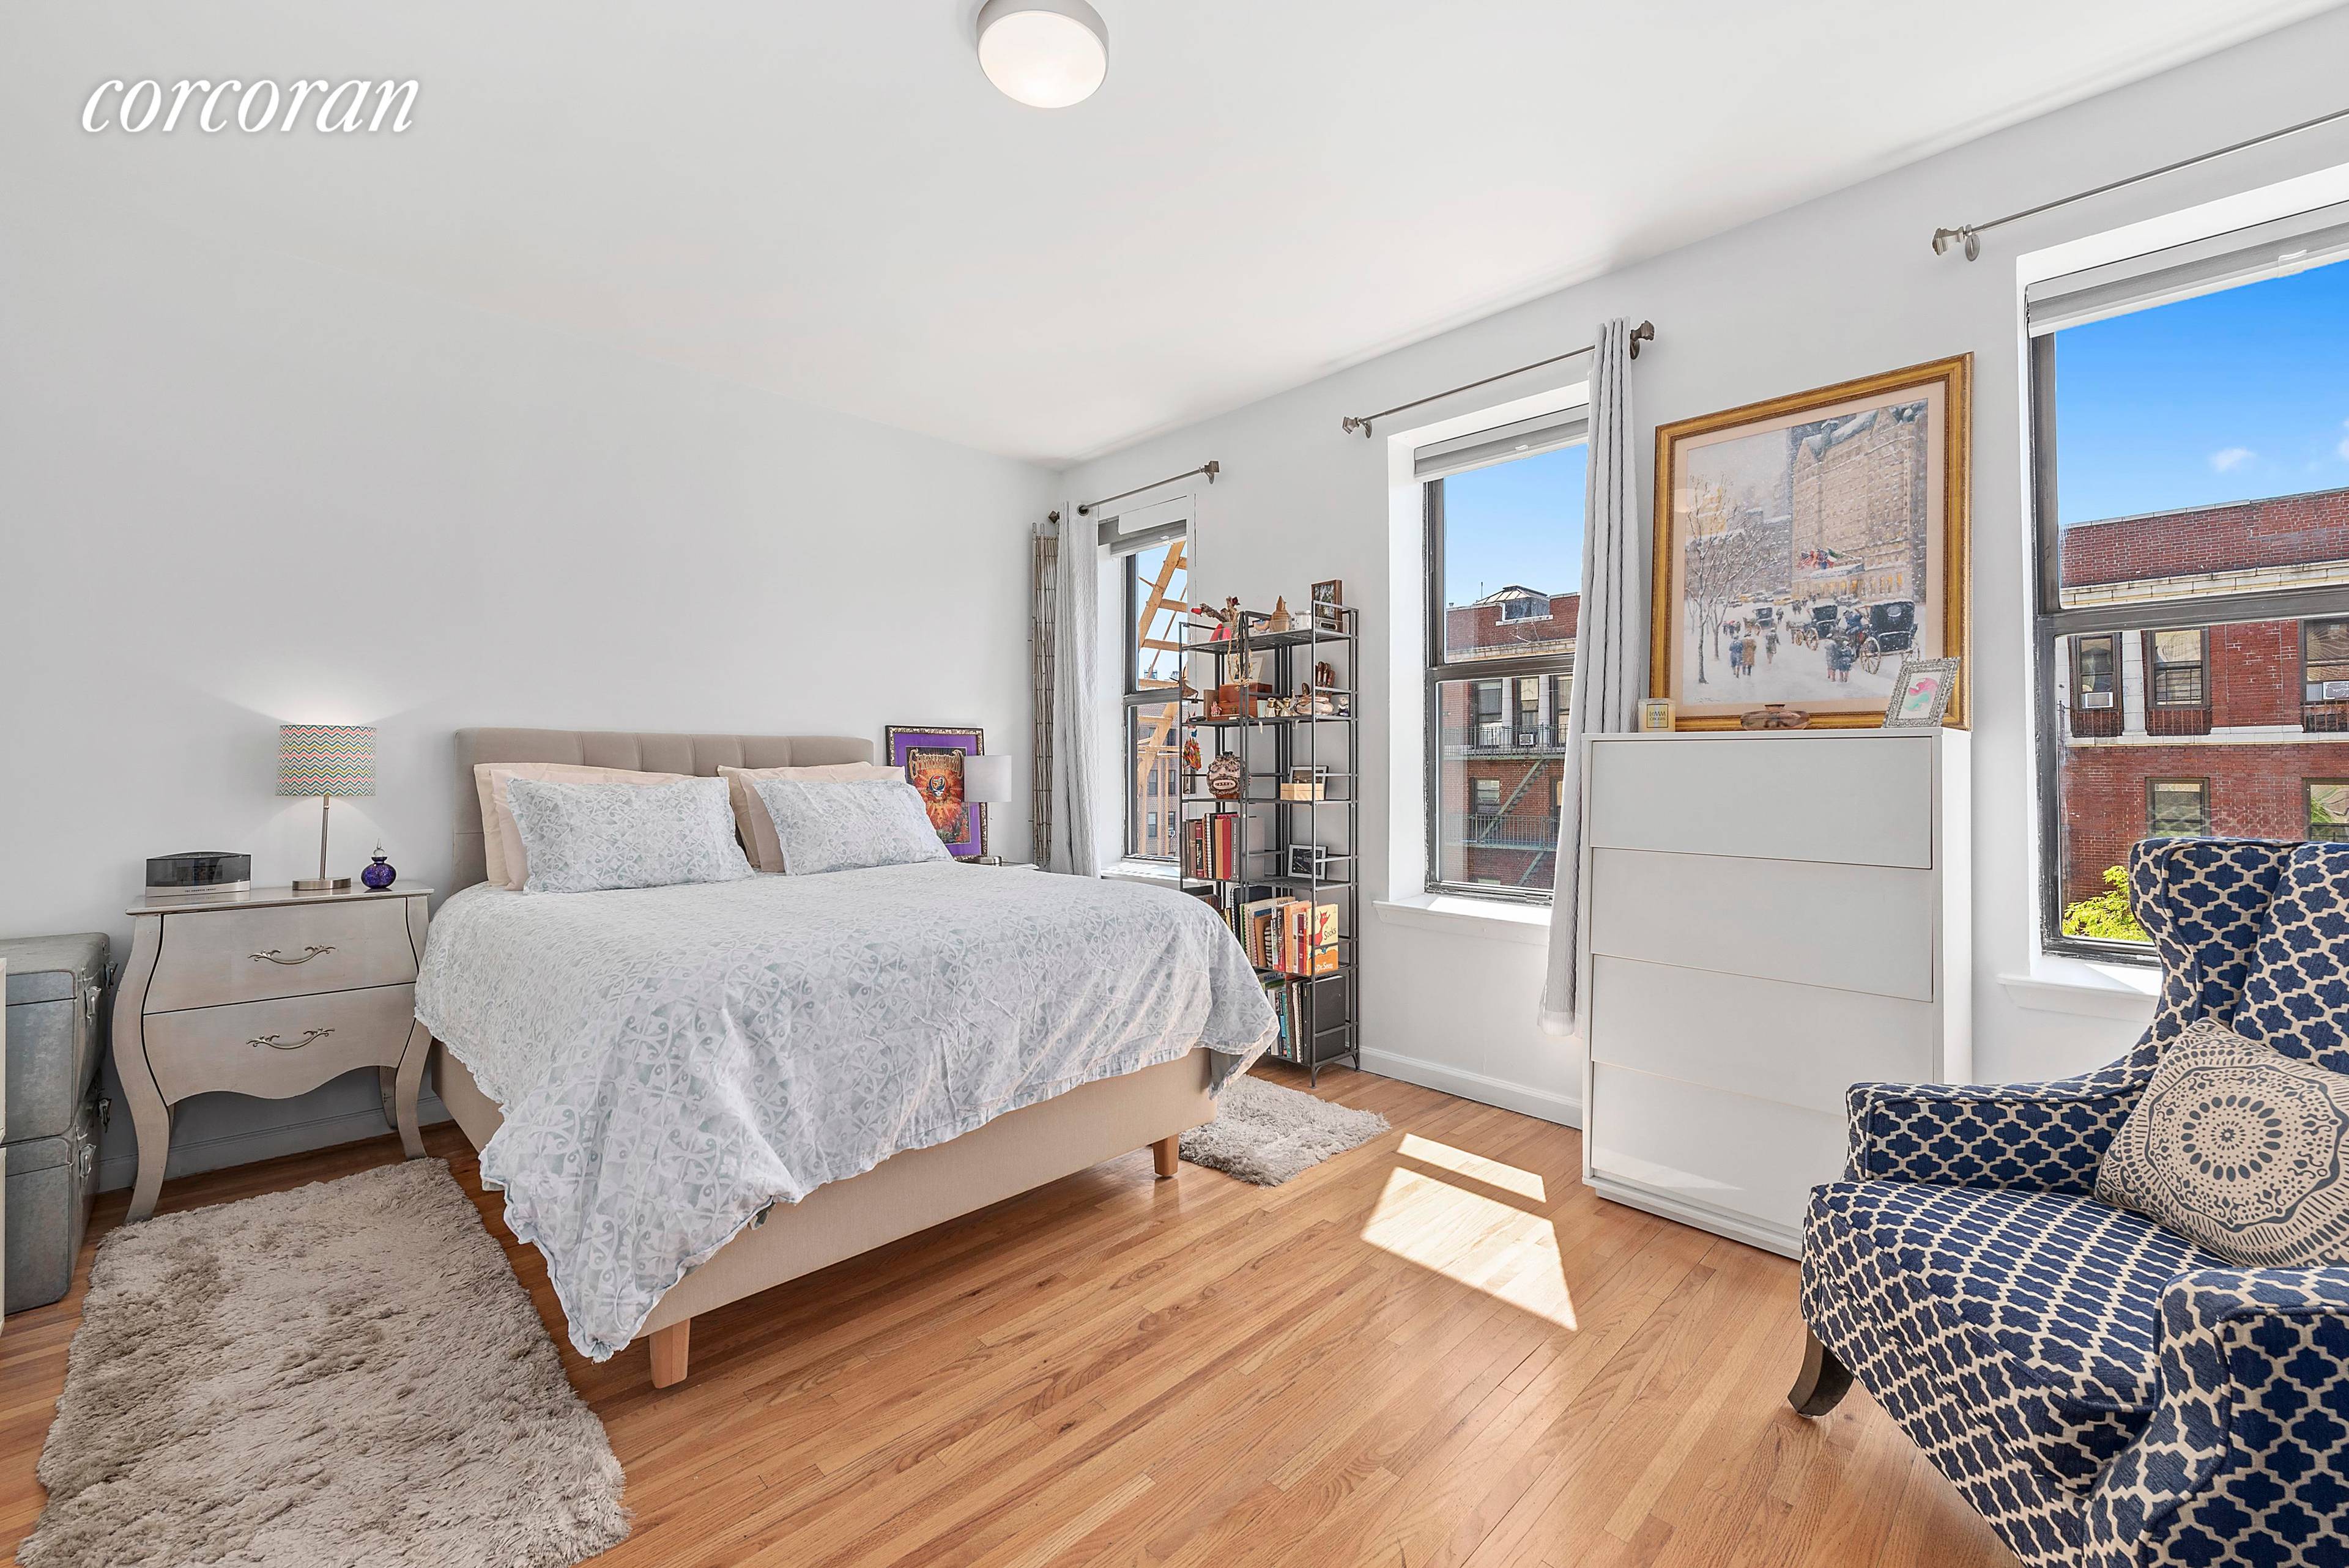 Welcome to 571 Academy, one of the Twin Condos, in the heart of Washington Heights.